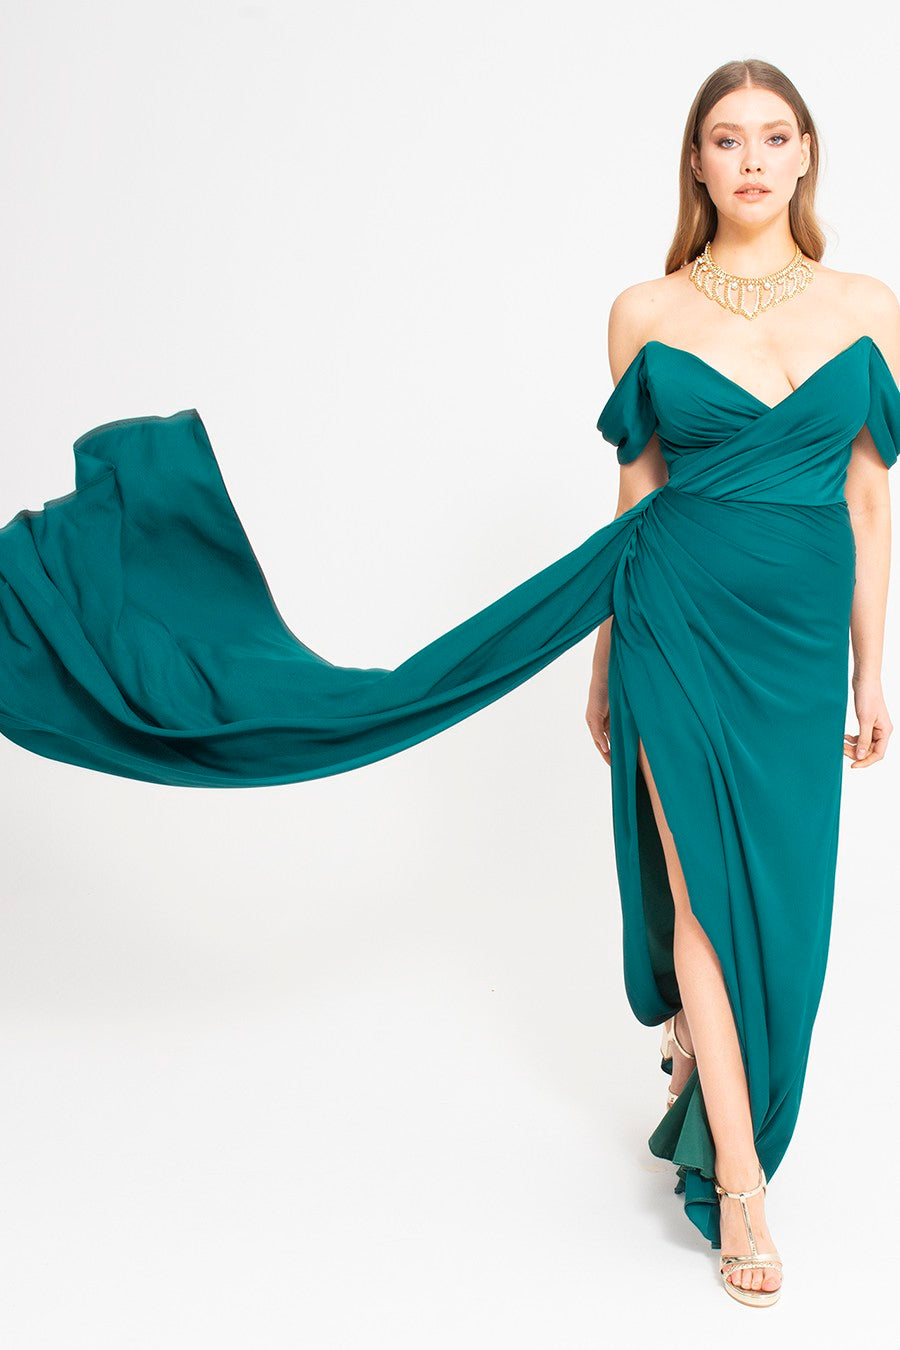 Nora - Mystic Evenings | Evening and Prom Dresses